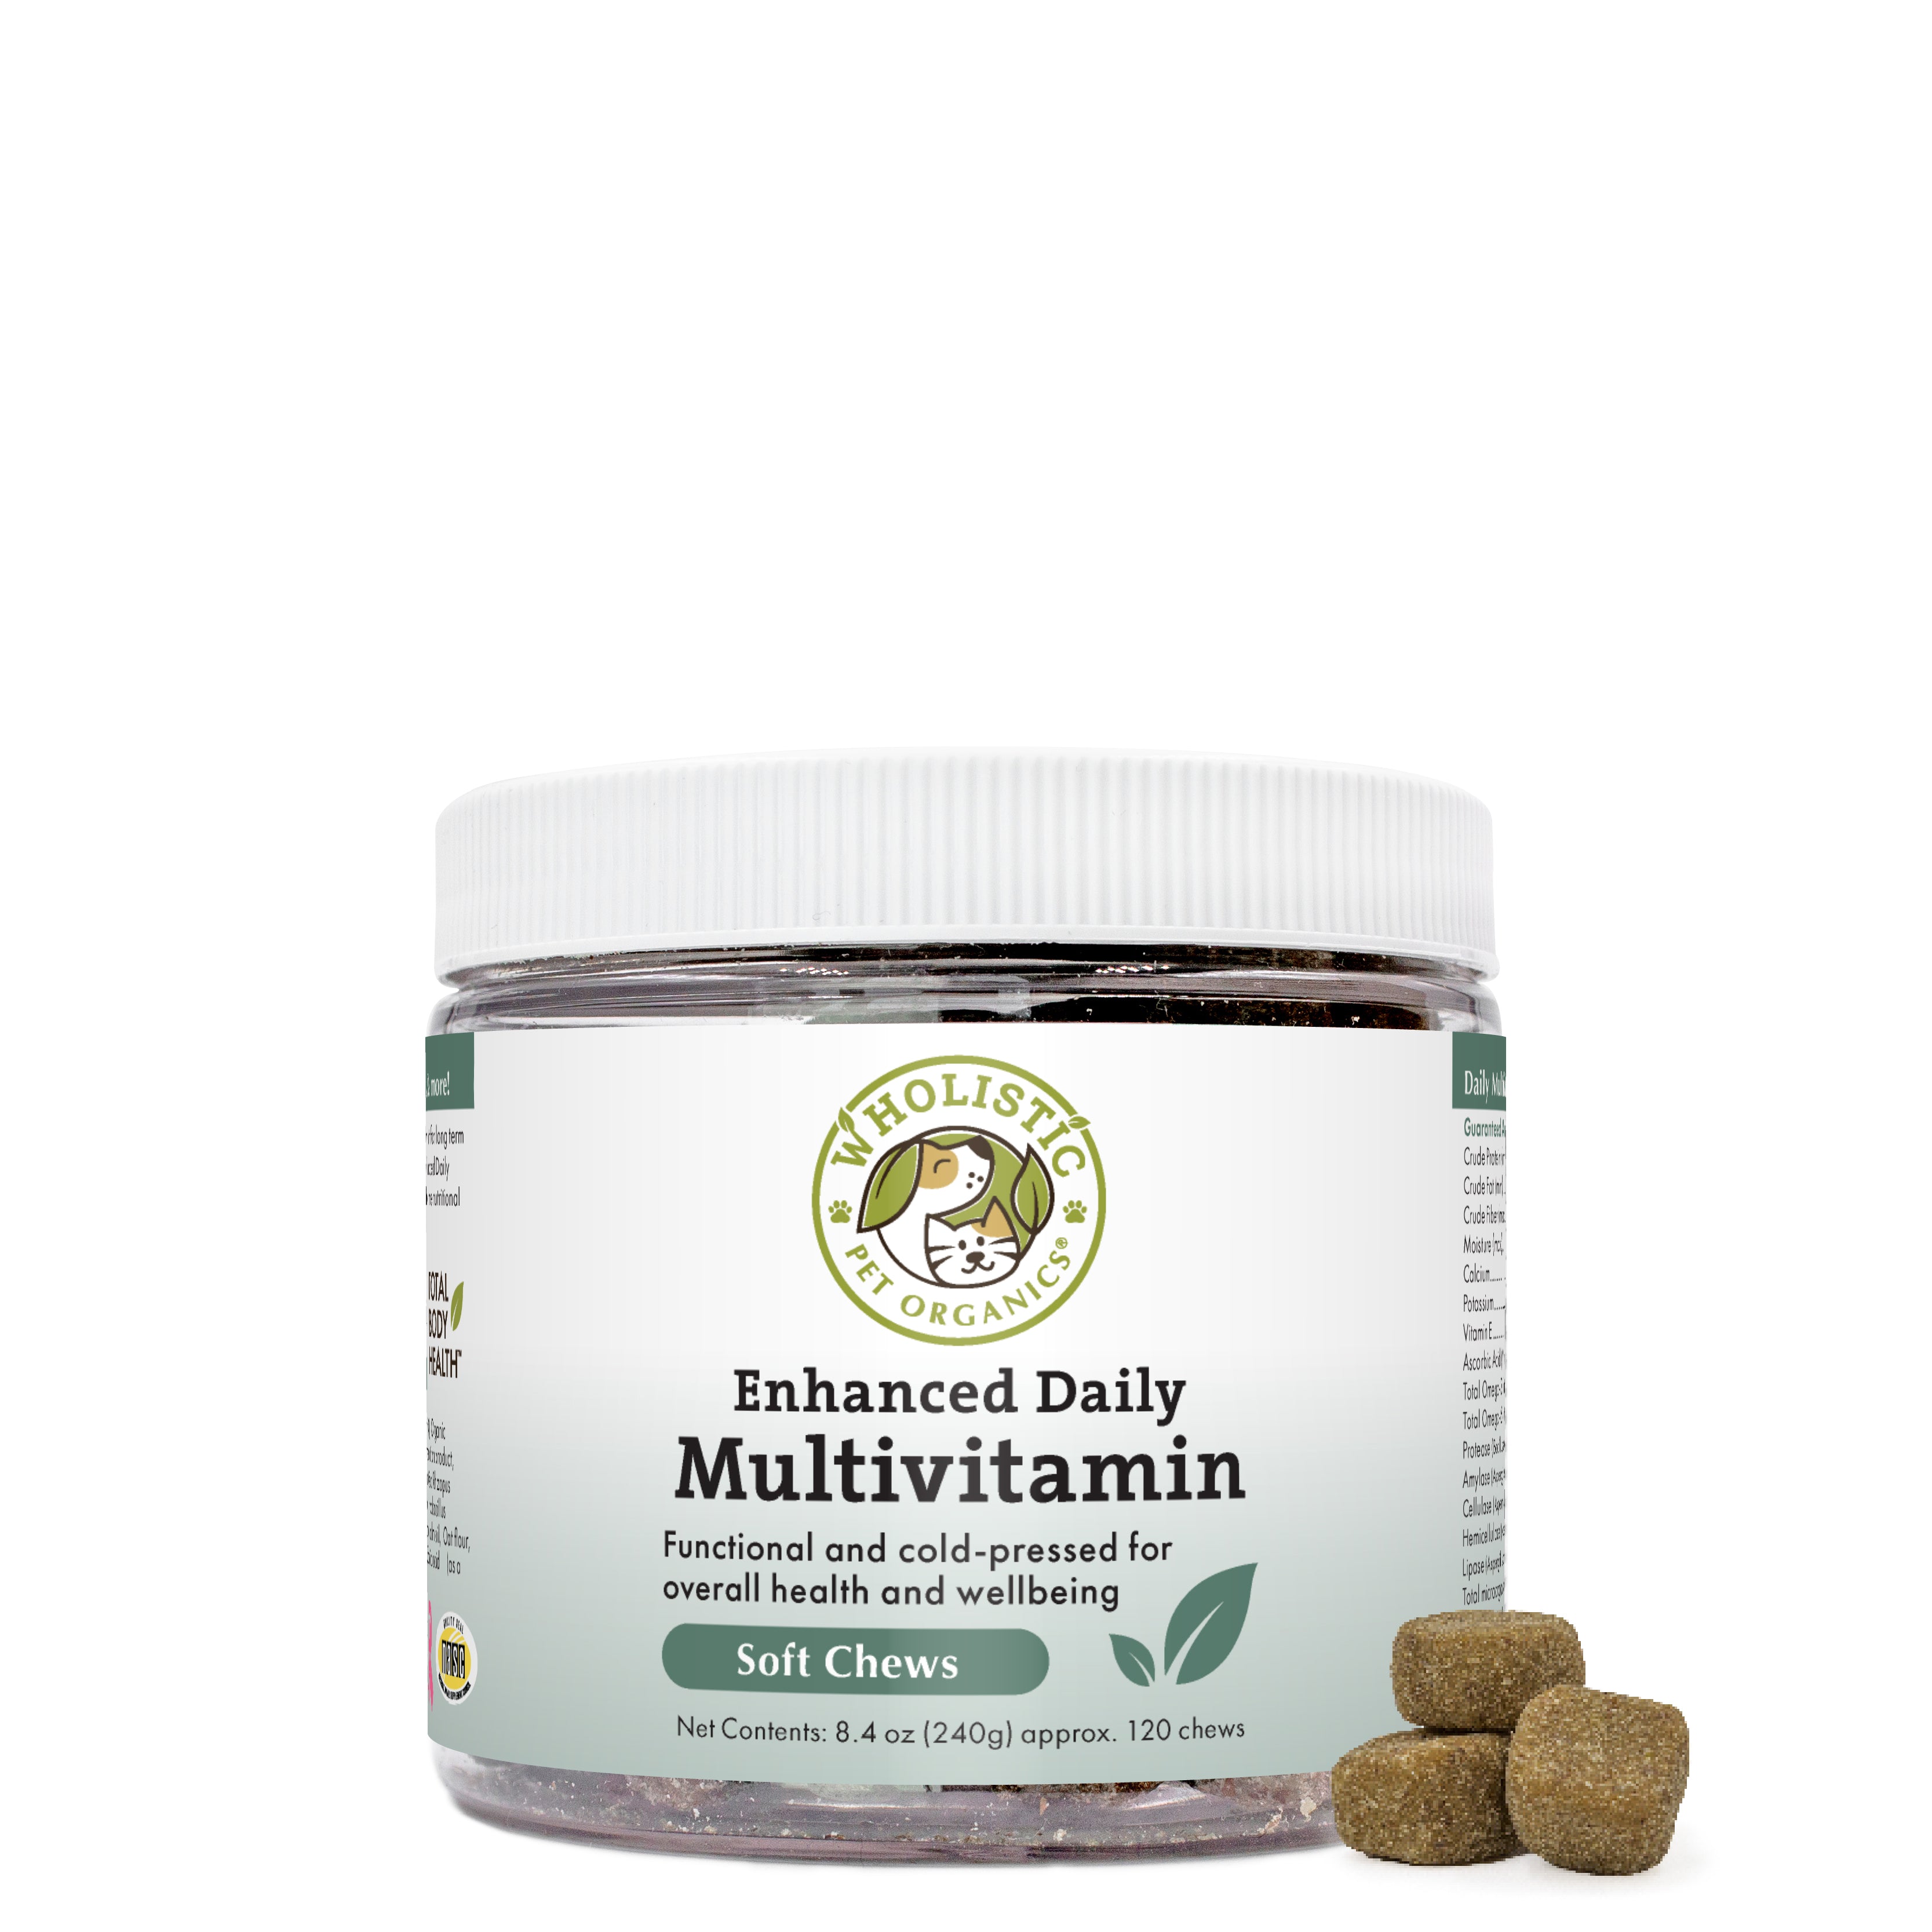 A super-premium, cold-pressed soft chew that provides your pet with a complete array of vitamins, minerals, enzymes, essential fatty acids, powerful antioxidants, and digestive microflora.